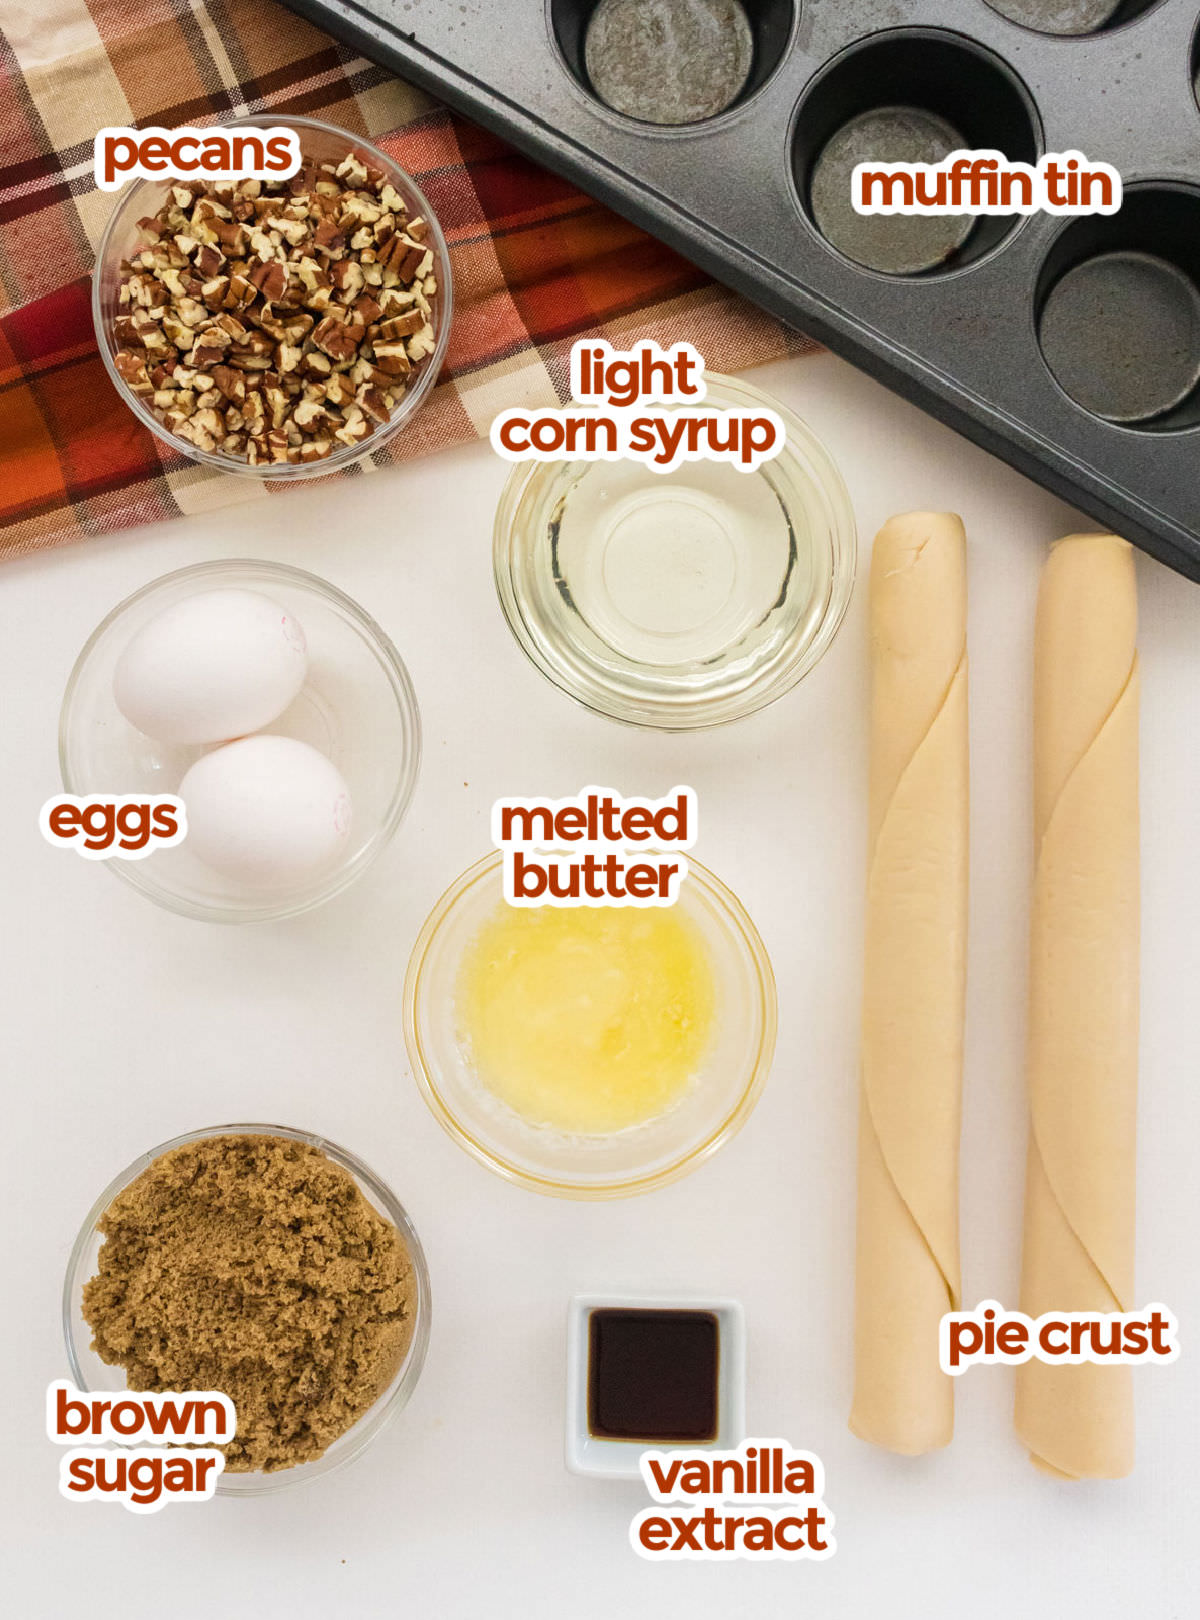 All the ingredients you will need to make Mini Pecan Pies including chopped pecans, light corn syrup, melted butter, eggs. vanilla extract, brown sugar and pie crusts.